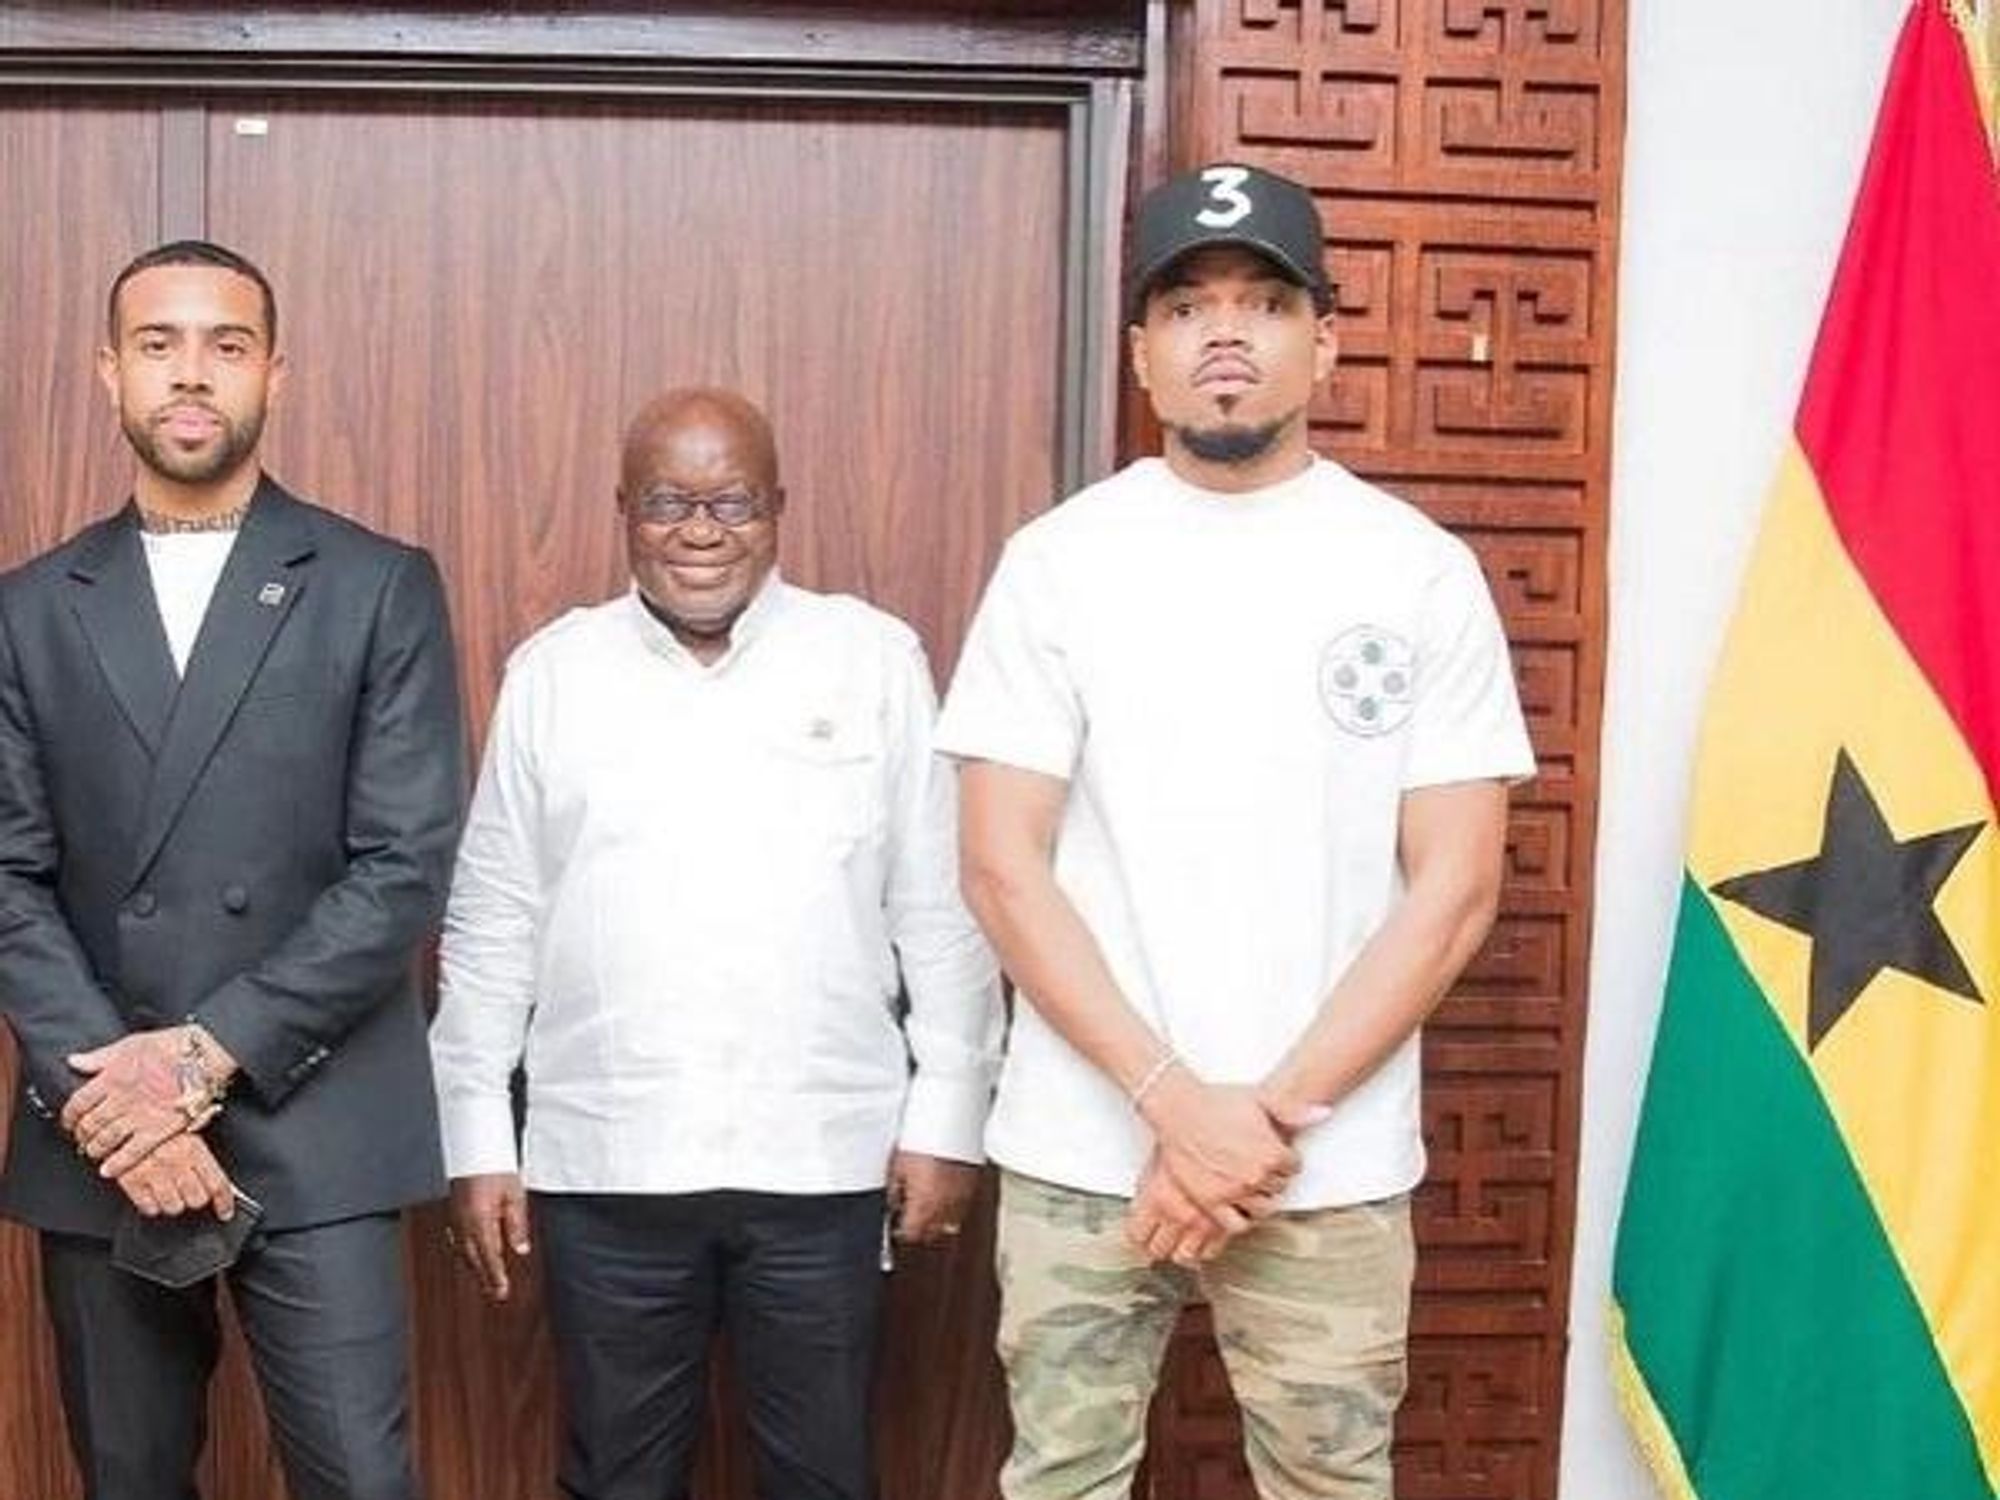 An image of the Ghanaian president with Chance the Rapper and Vic Mensa